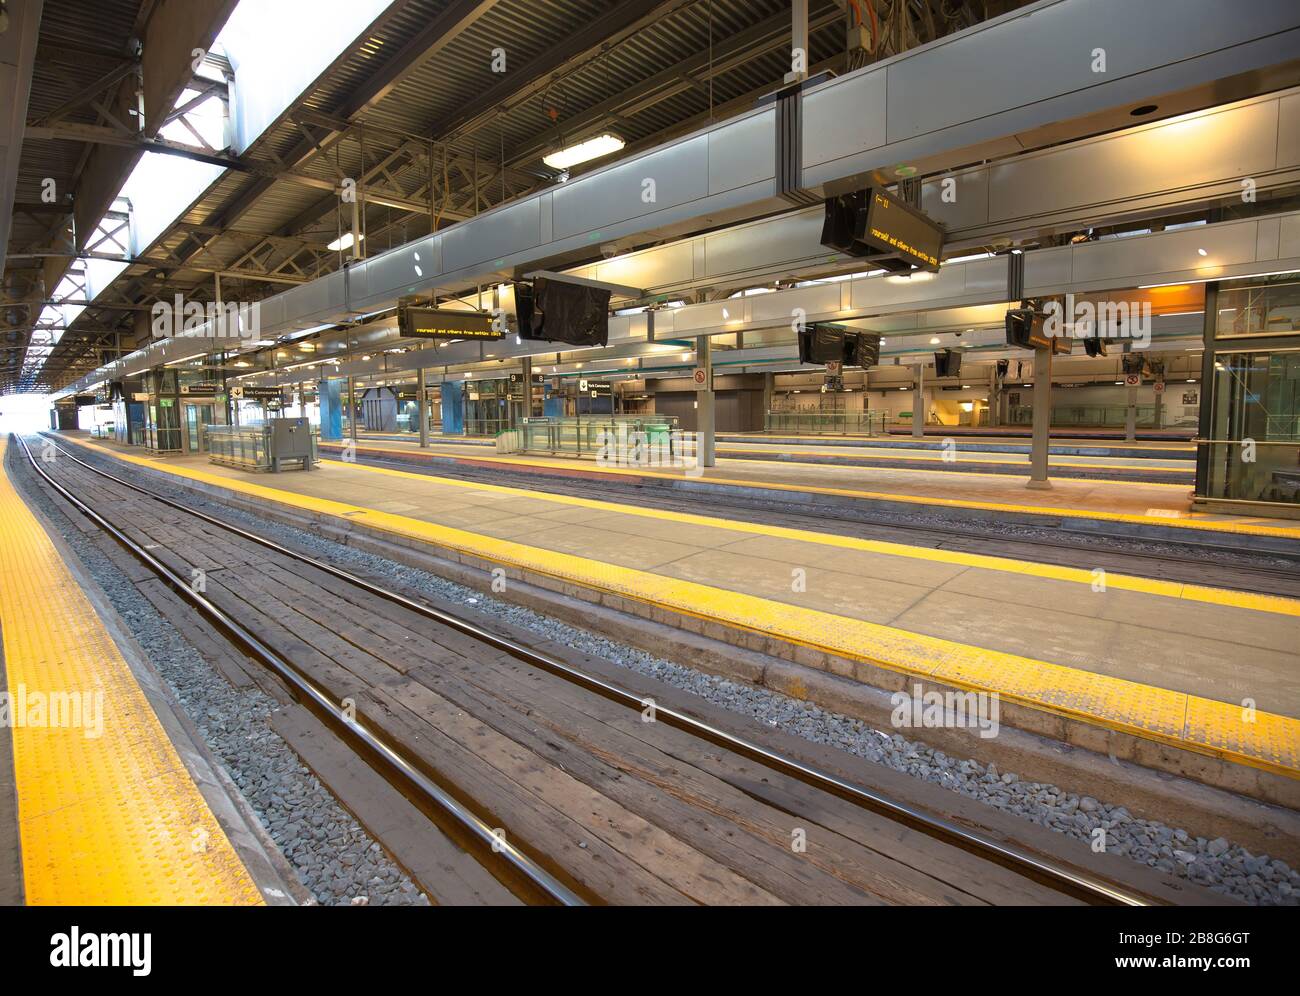 Toronto, Canada-20 March, 2020: Empty Union Railway station in Toronto during the Covid-19 (coronavirus) pandemic with implemented travel restrictions Stock Photo